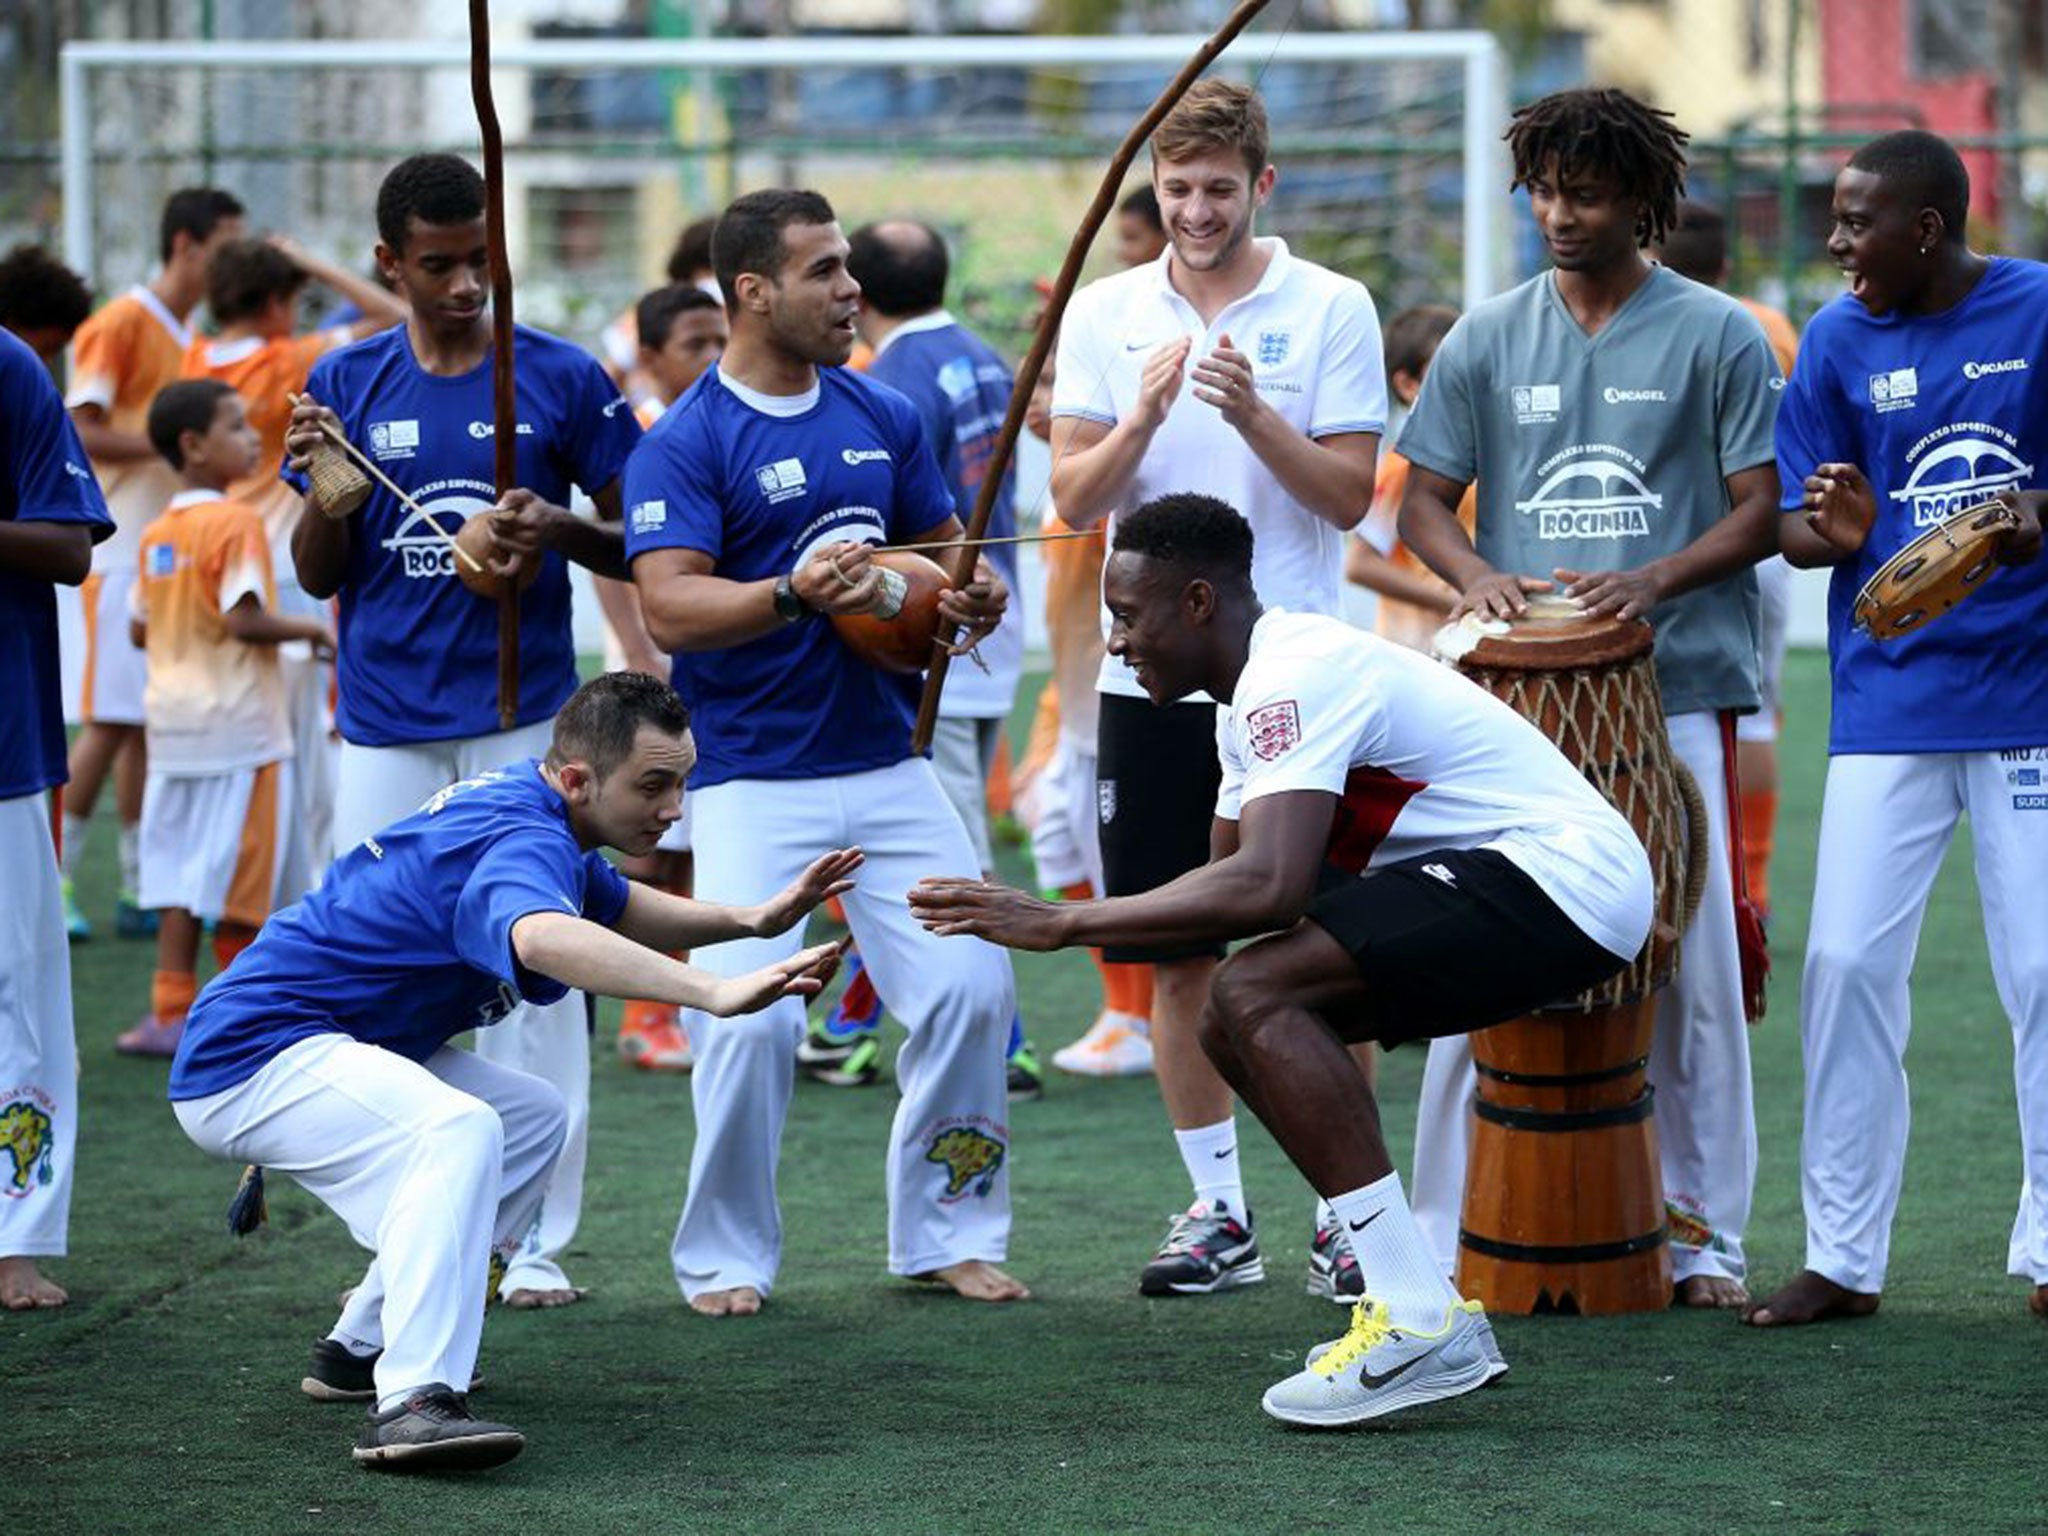 Danny Welbeck and Adam Lallana were among the willing participants in the capoeira session